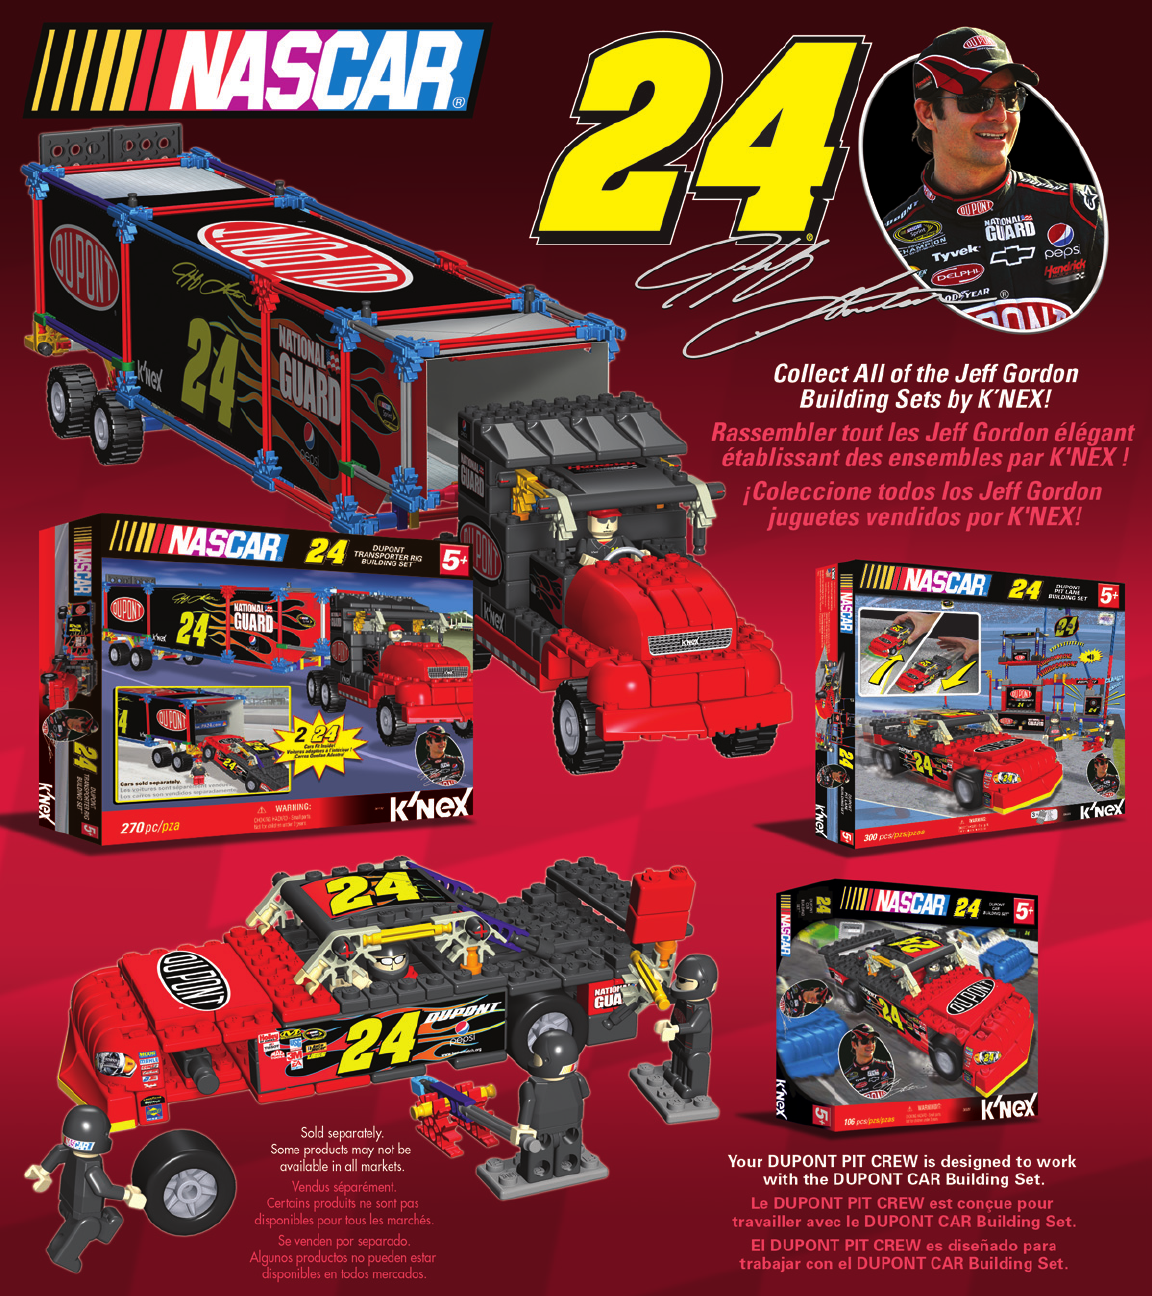 Manual Knex Nascar Nr 24 Dupont Pit Crew Page 1 Of 2 All Languages